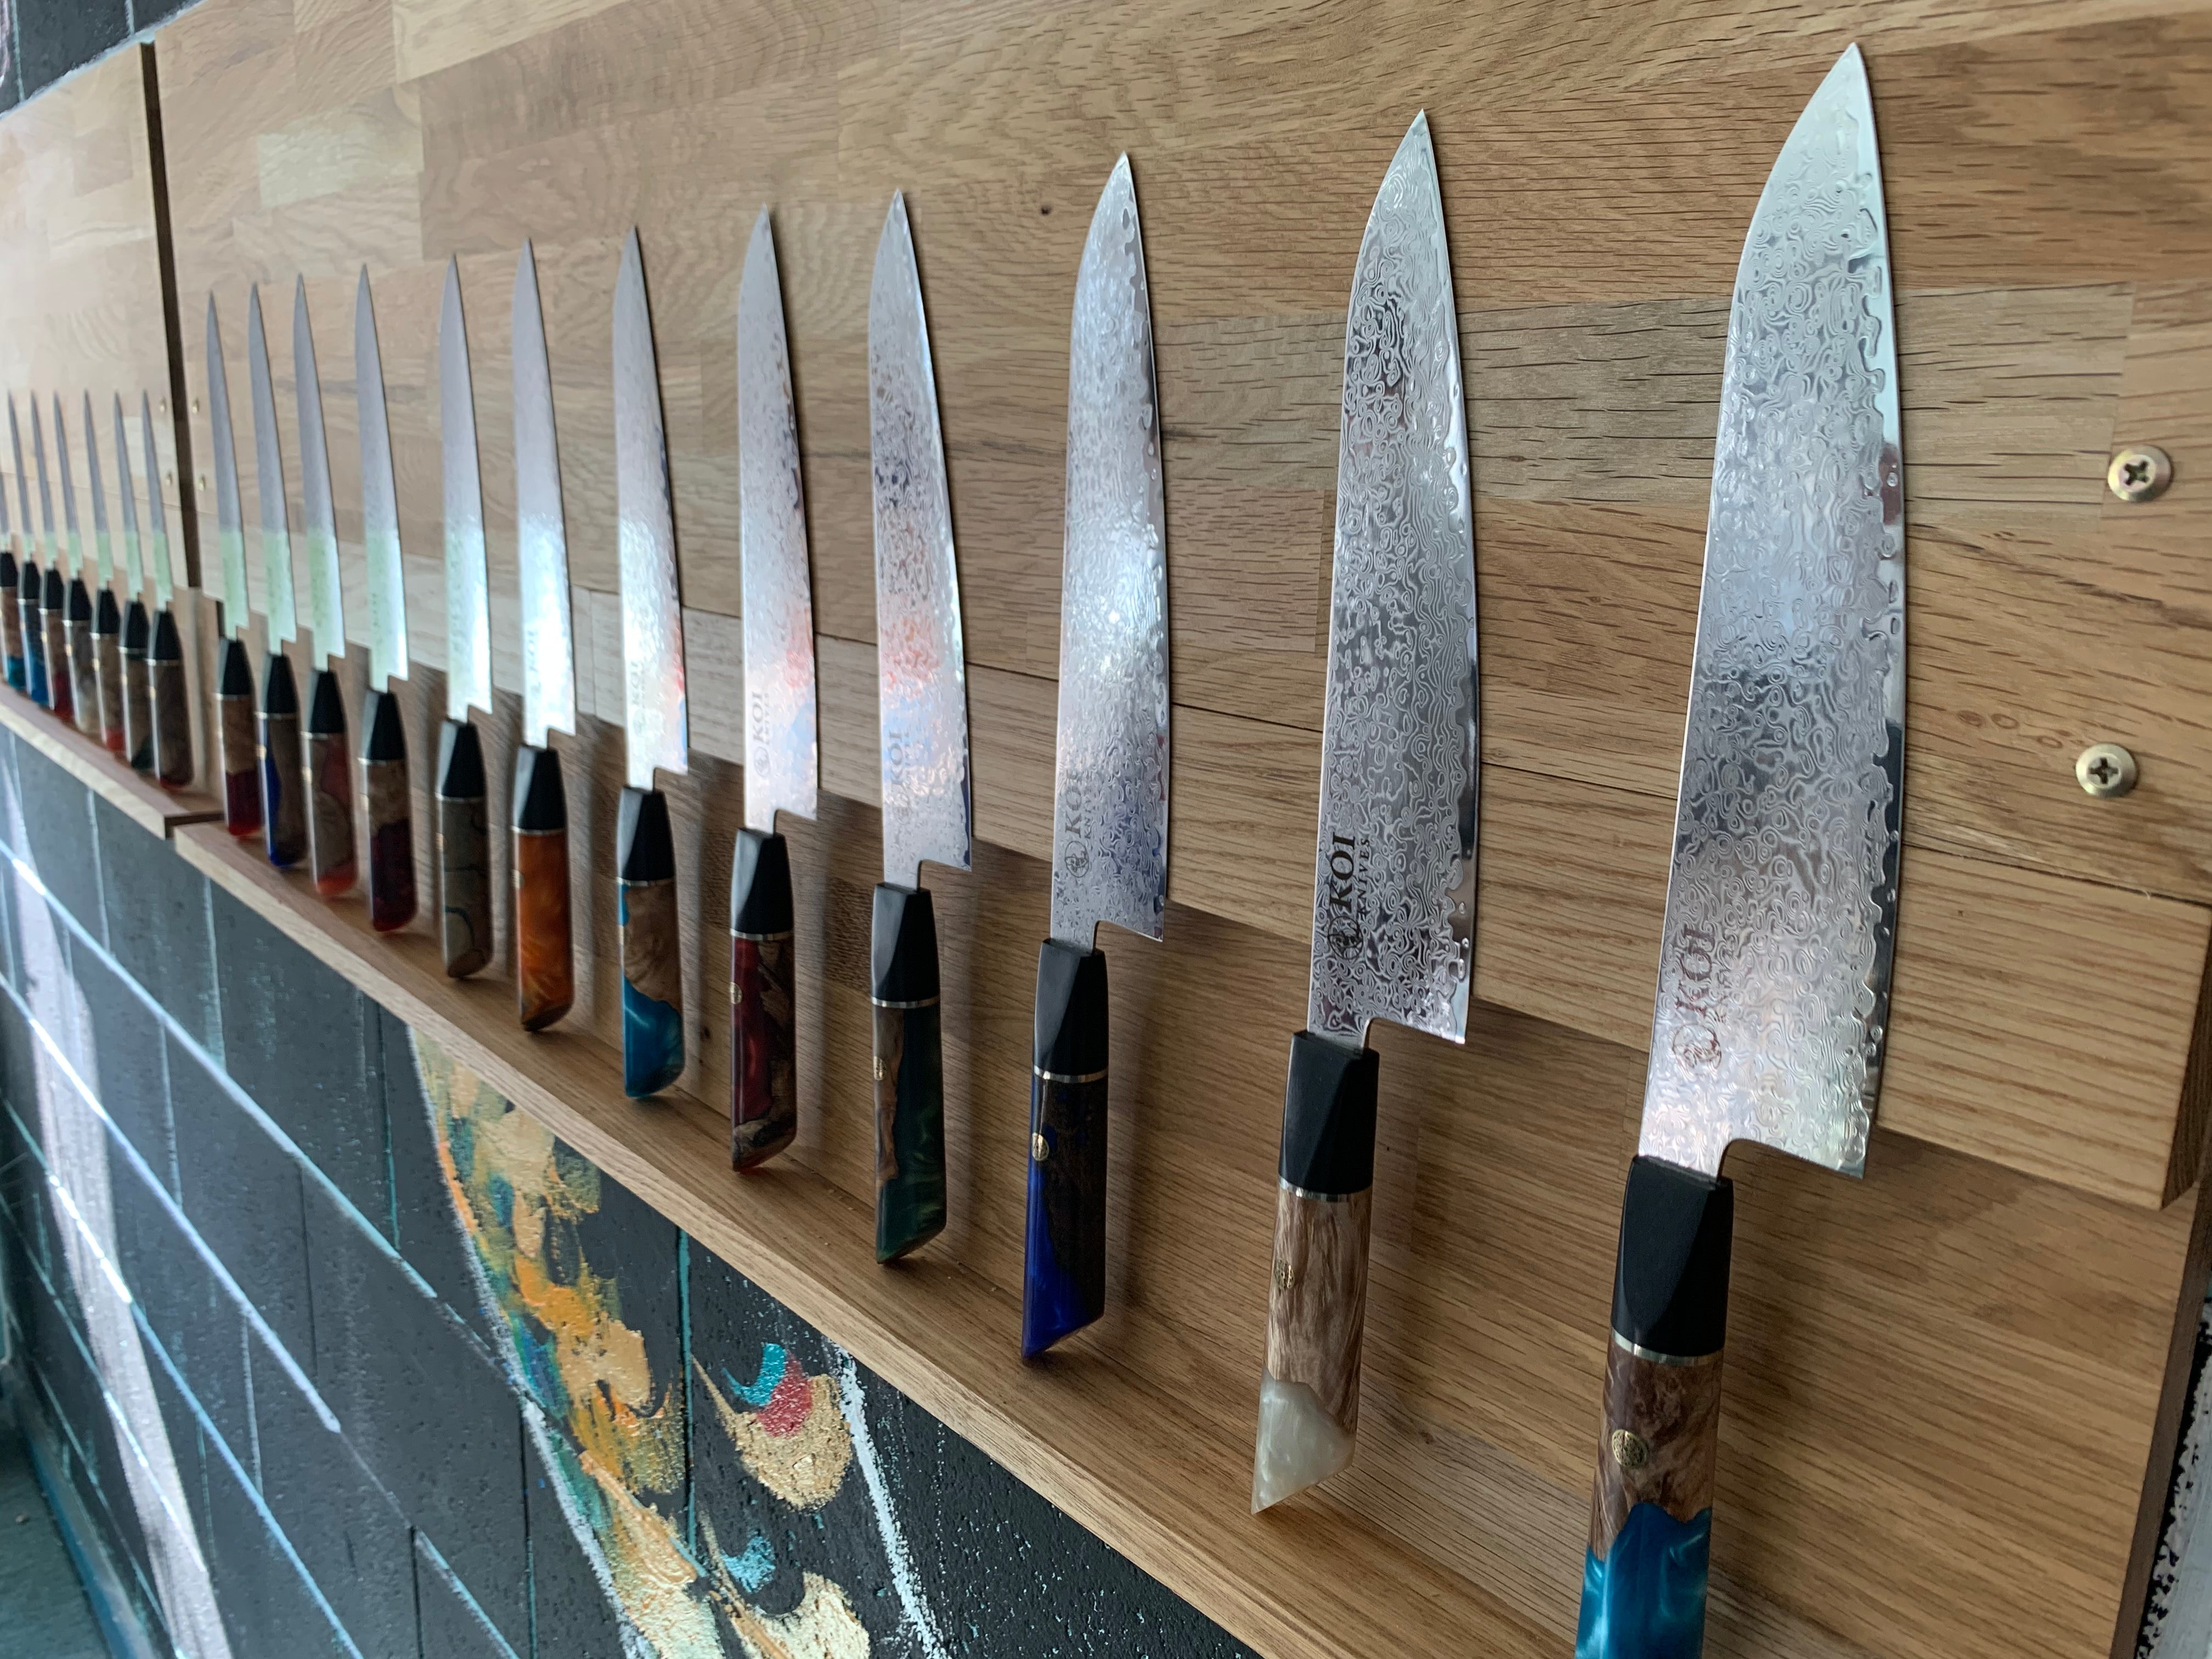 The Top 5 Ways to Keep Your Kitchen Knives Sharp  Knifewear - Handcrafted  Japanese Kitchen Knives